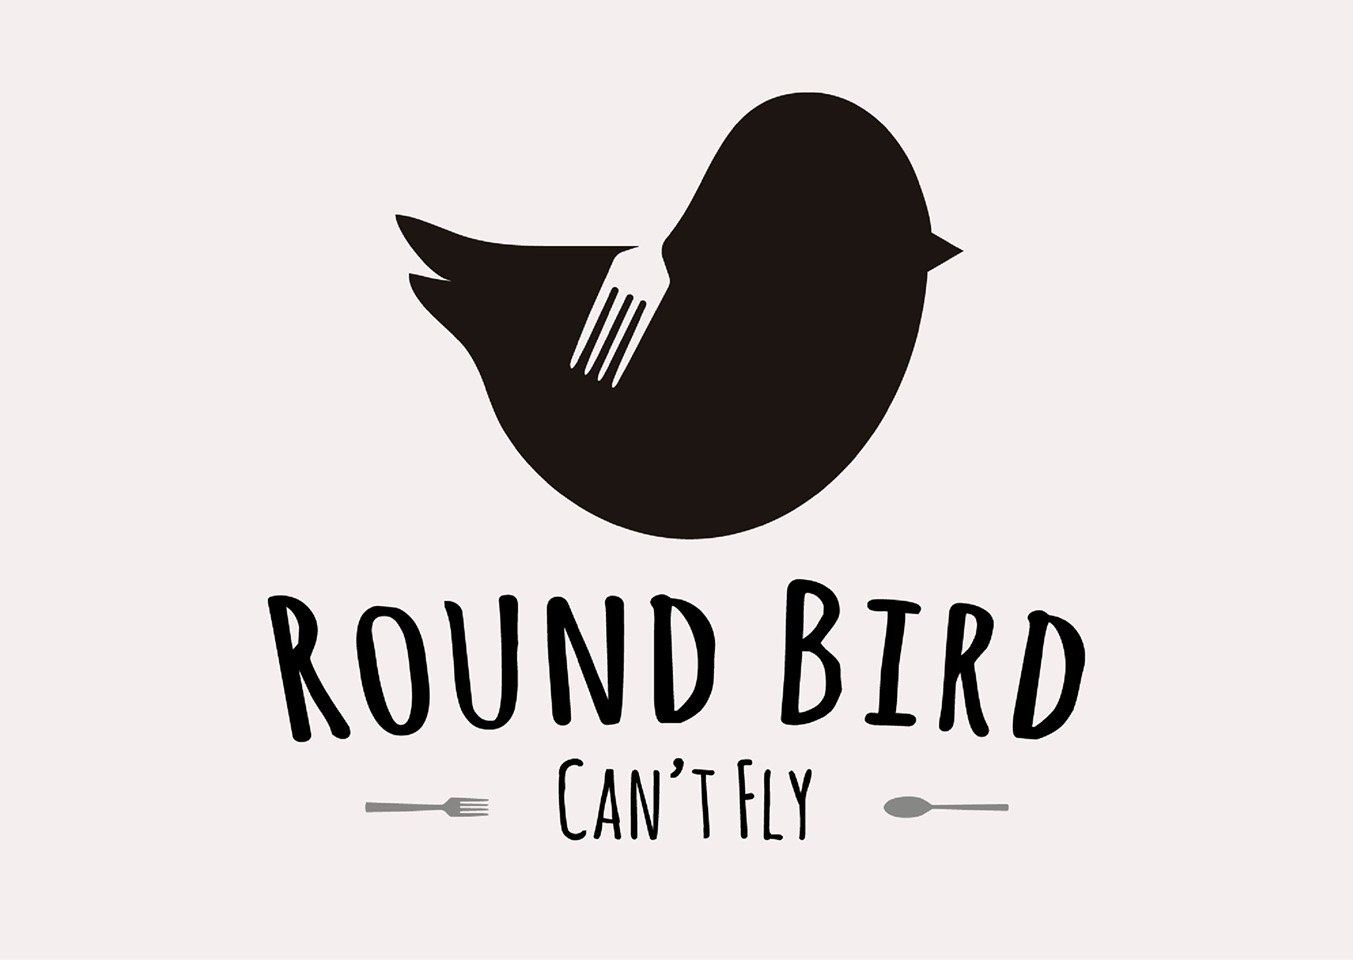 Round bird can't fly